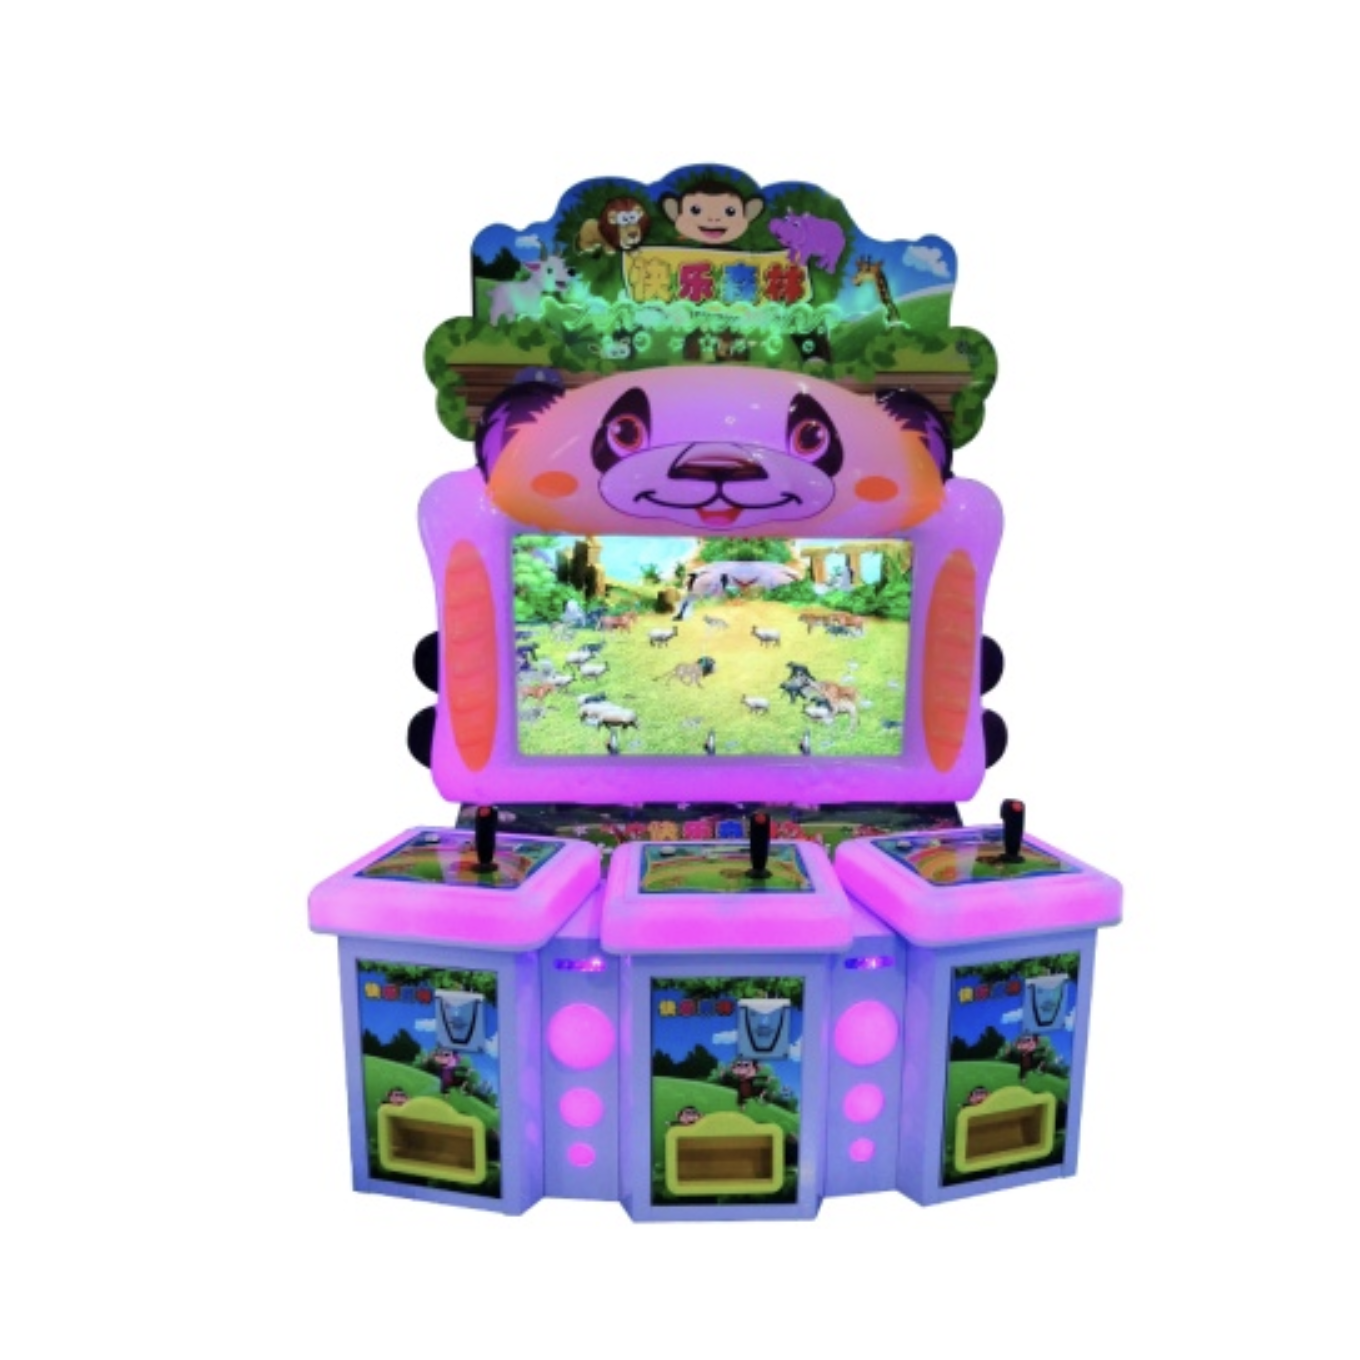 Most Popular Arcade Kids Redemption Machine For Sale Made In China